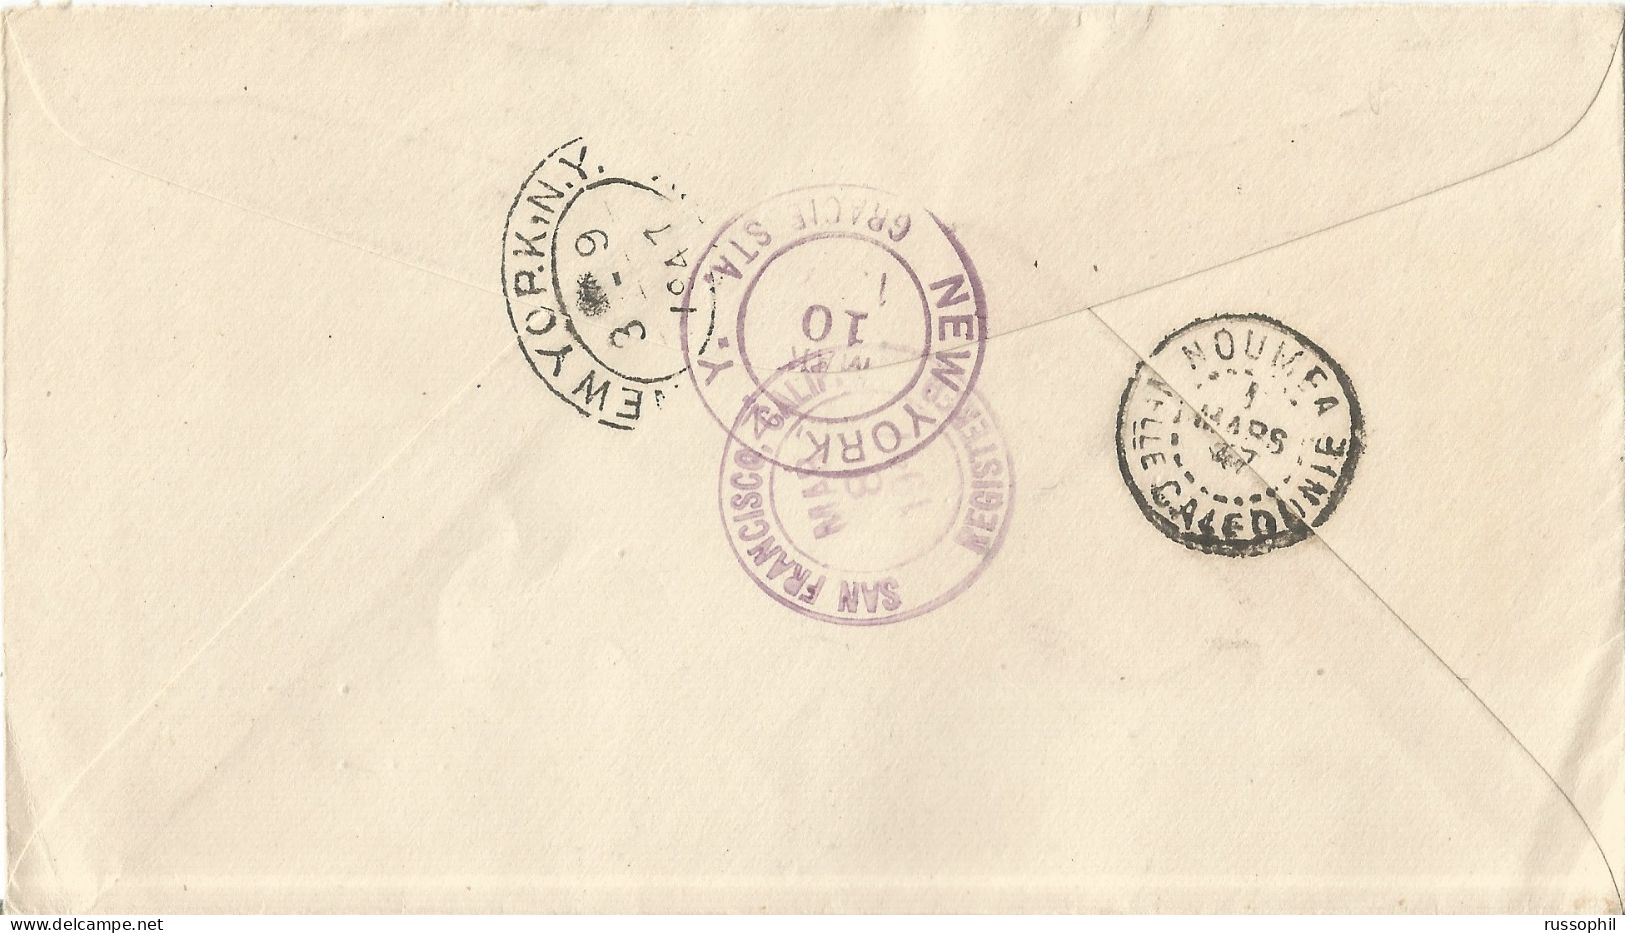 WALLIS AND FUTUNA - 60 FR FRANKING "FROM CHAD TO THE RHINE RIVER" ISSUE ON REGISTERED COVER TO THE USA - 1946 - Brieven En Documenten